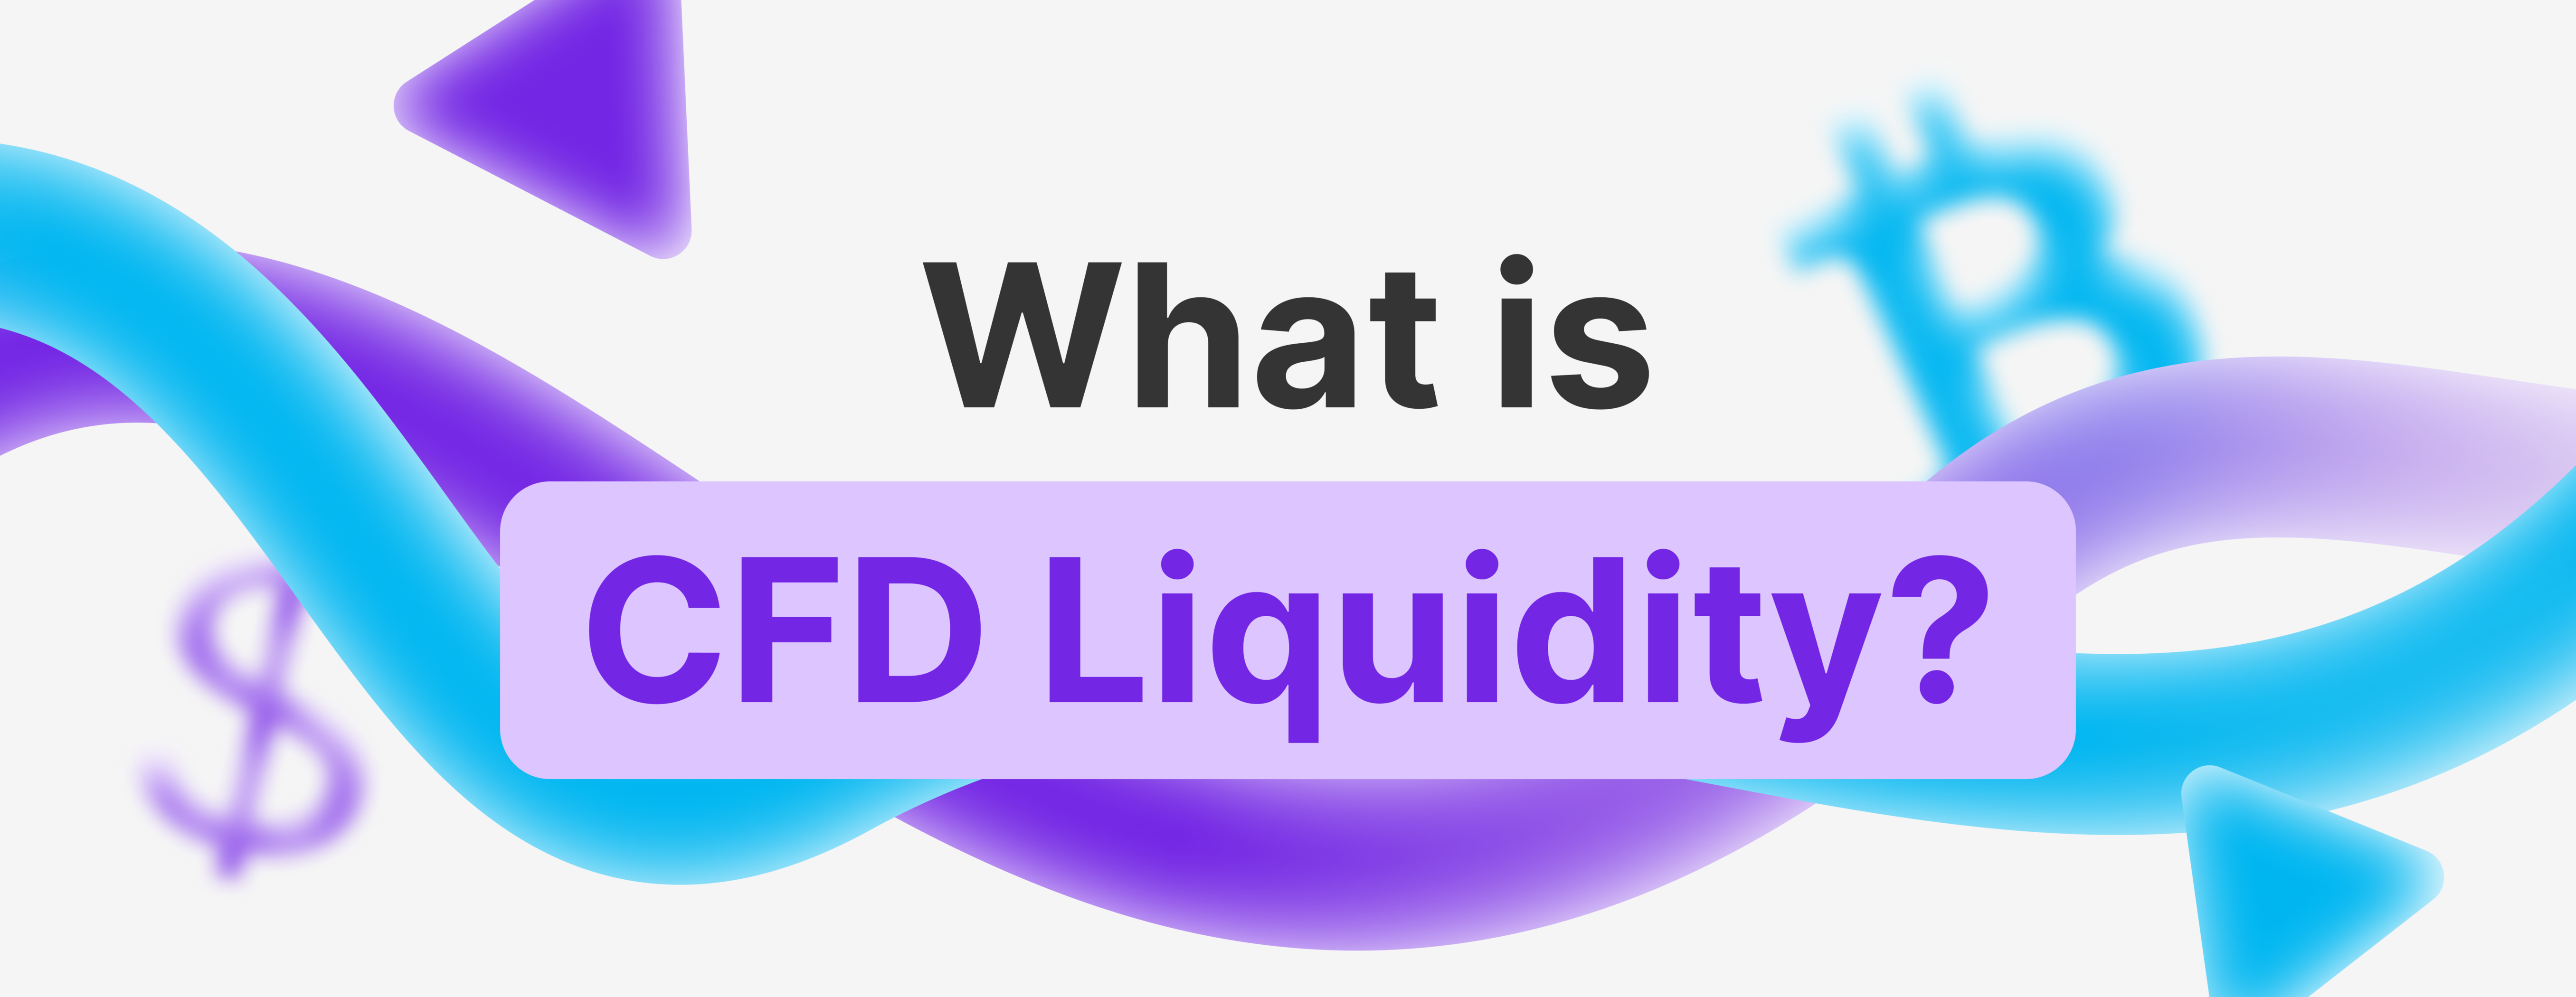 What is CFD Liquidity?